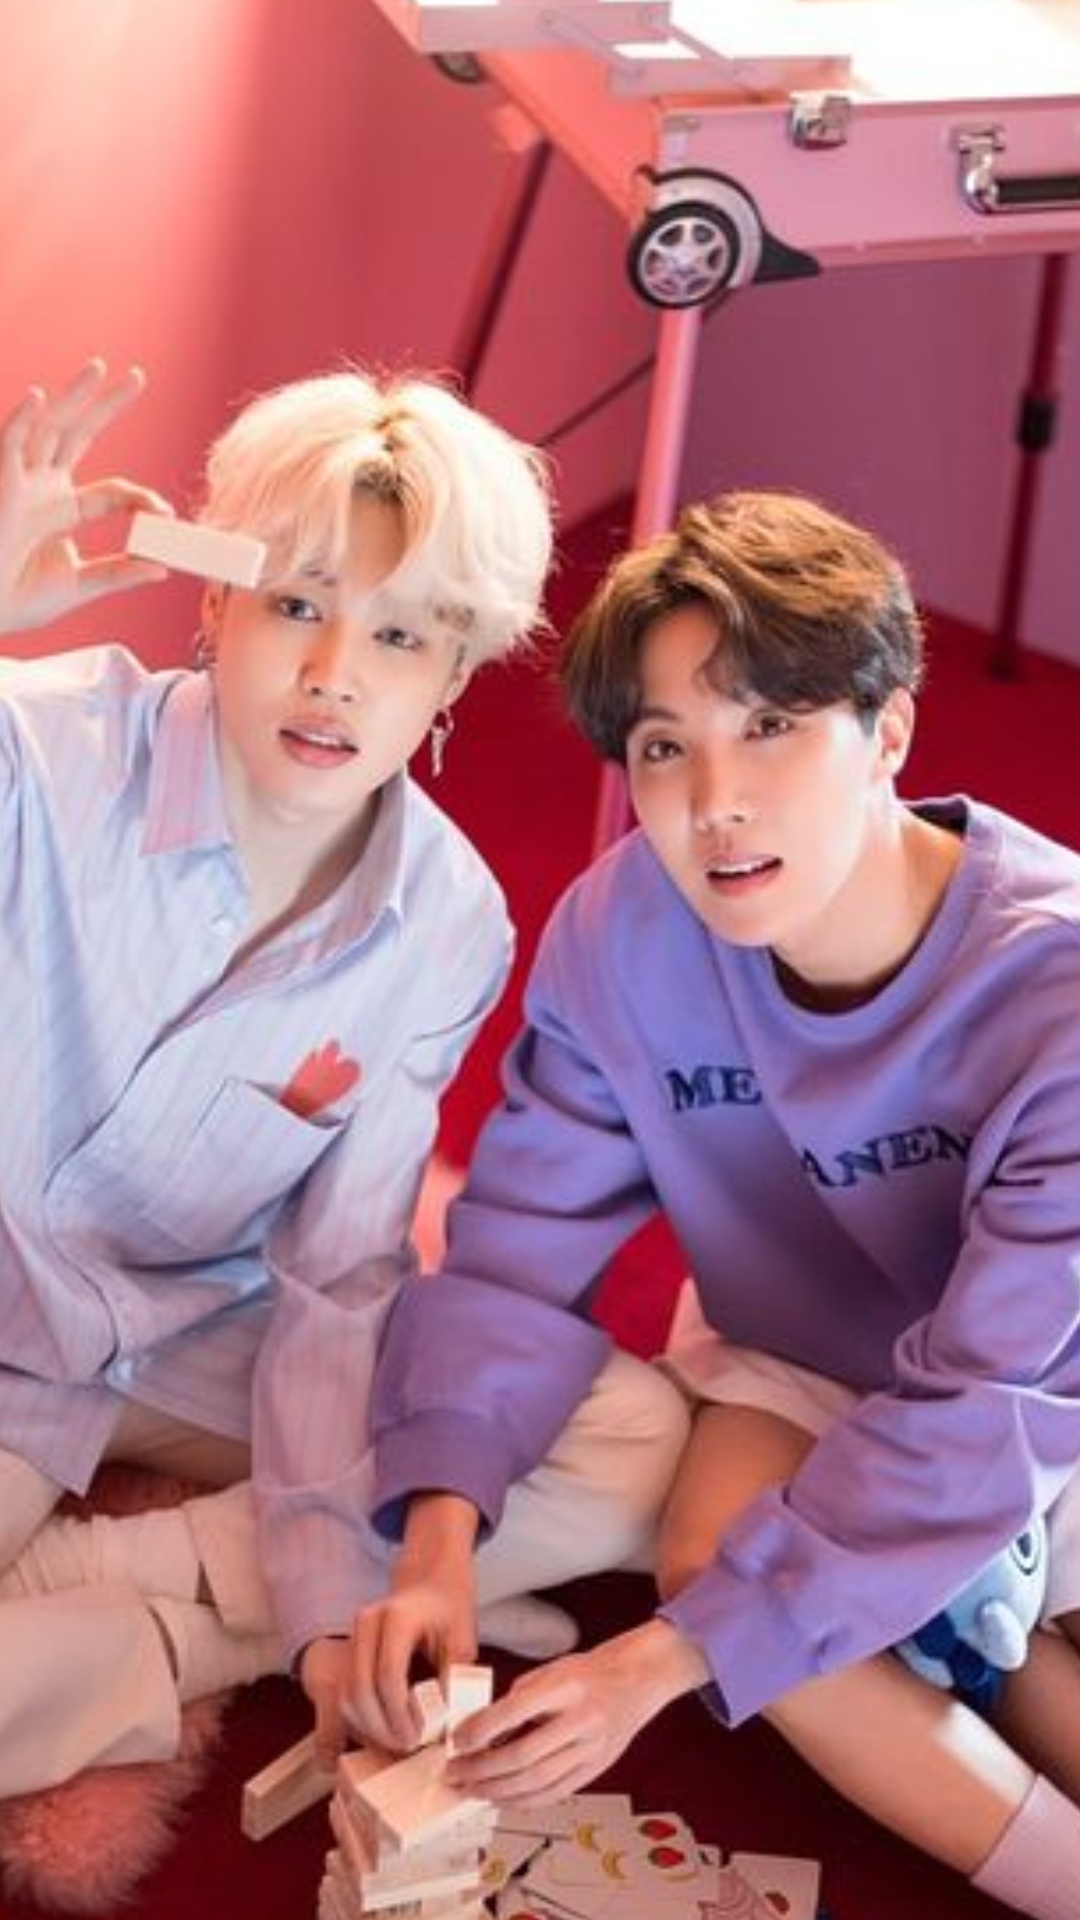 BTS's Jimin looks fabulous at the Dior fashion event in Paris with J-Hope